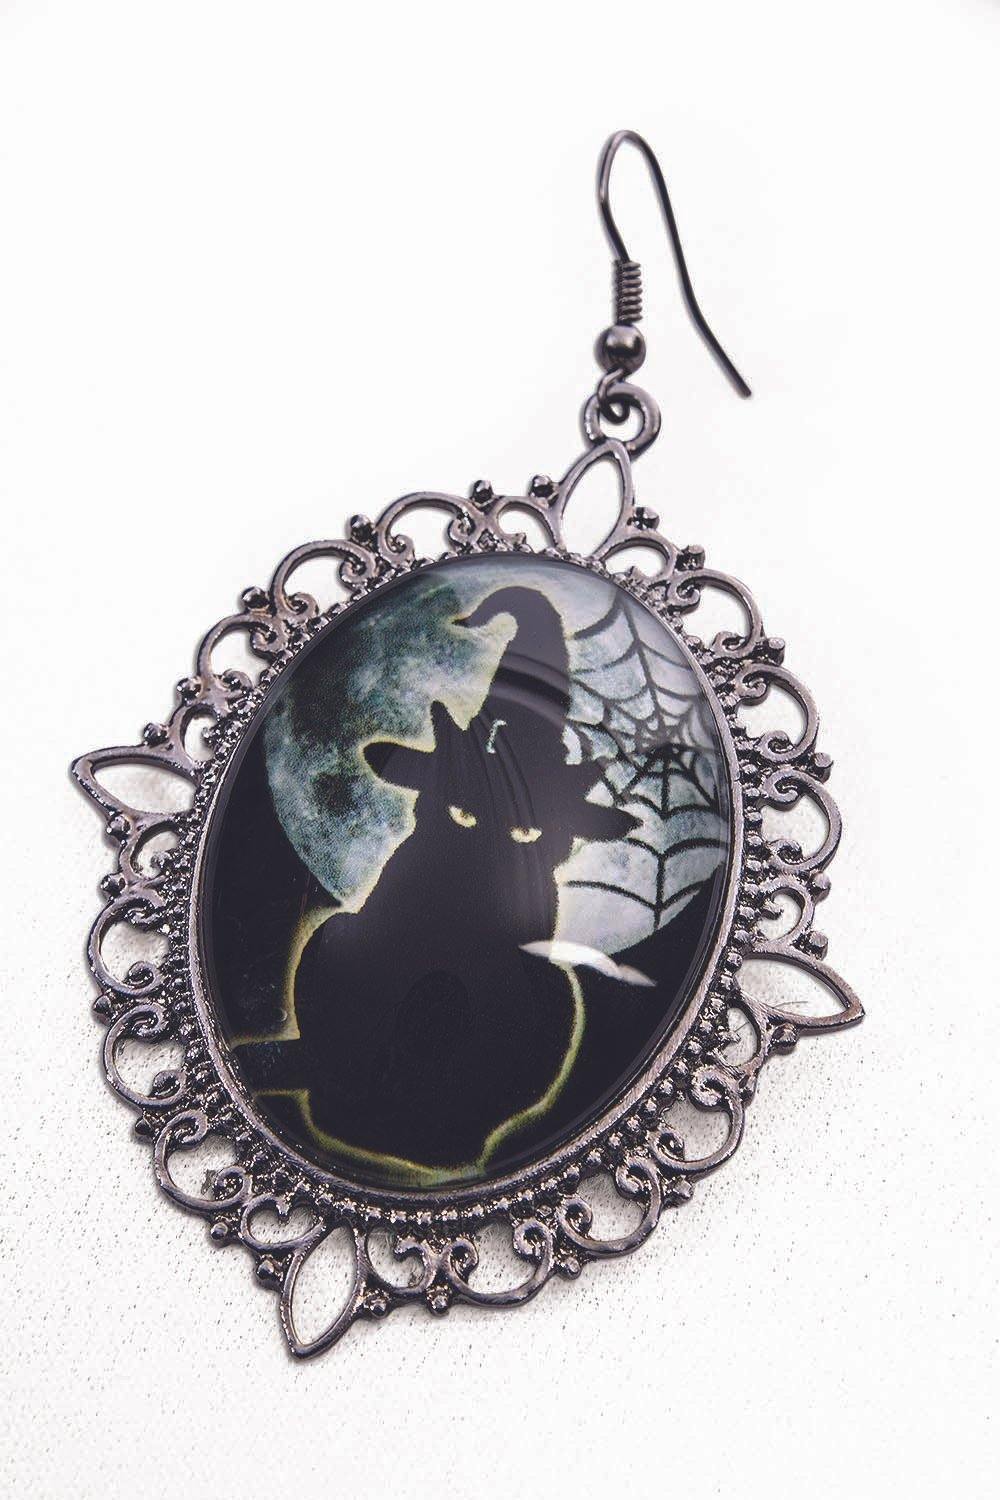 Witch & Wizard Cameo Earrings black cat halloween